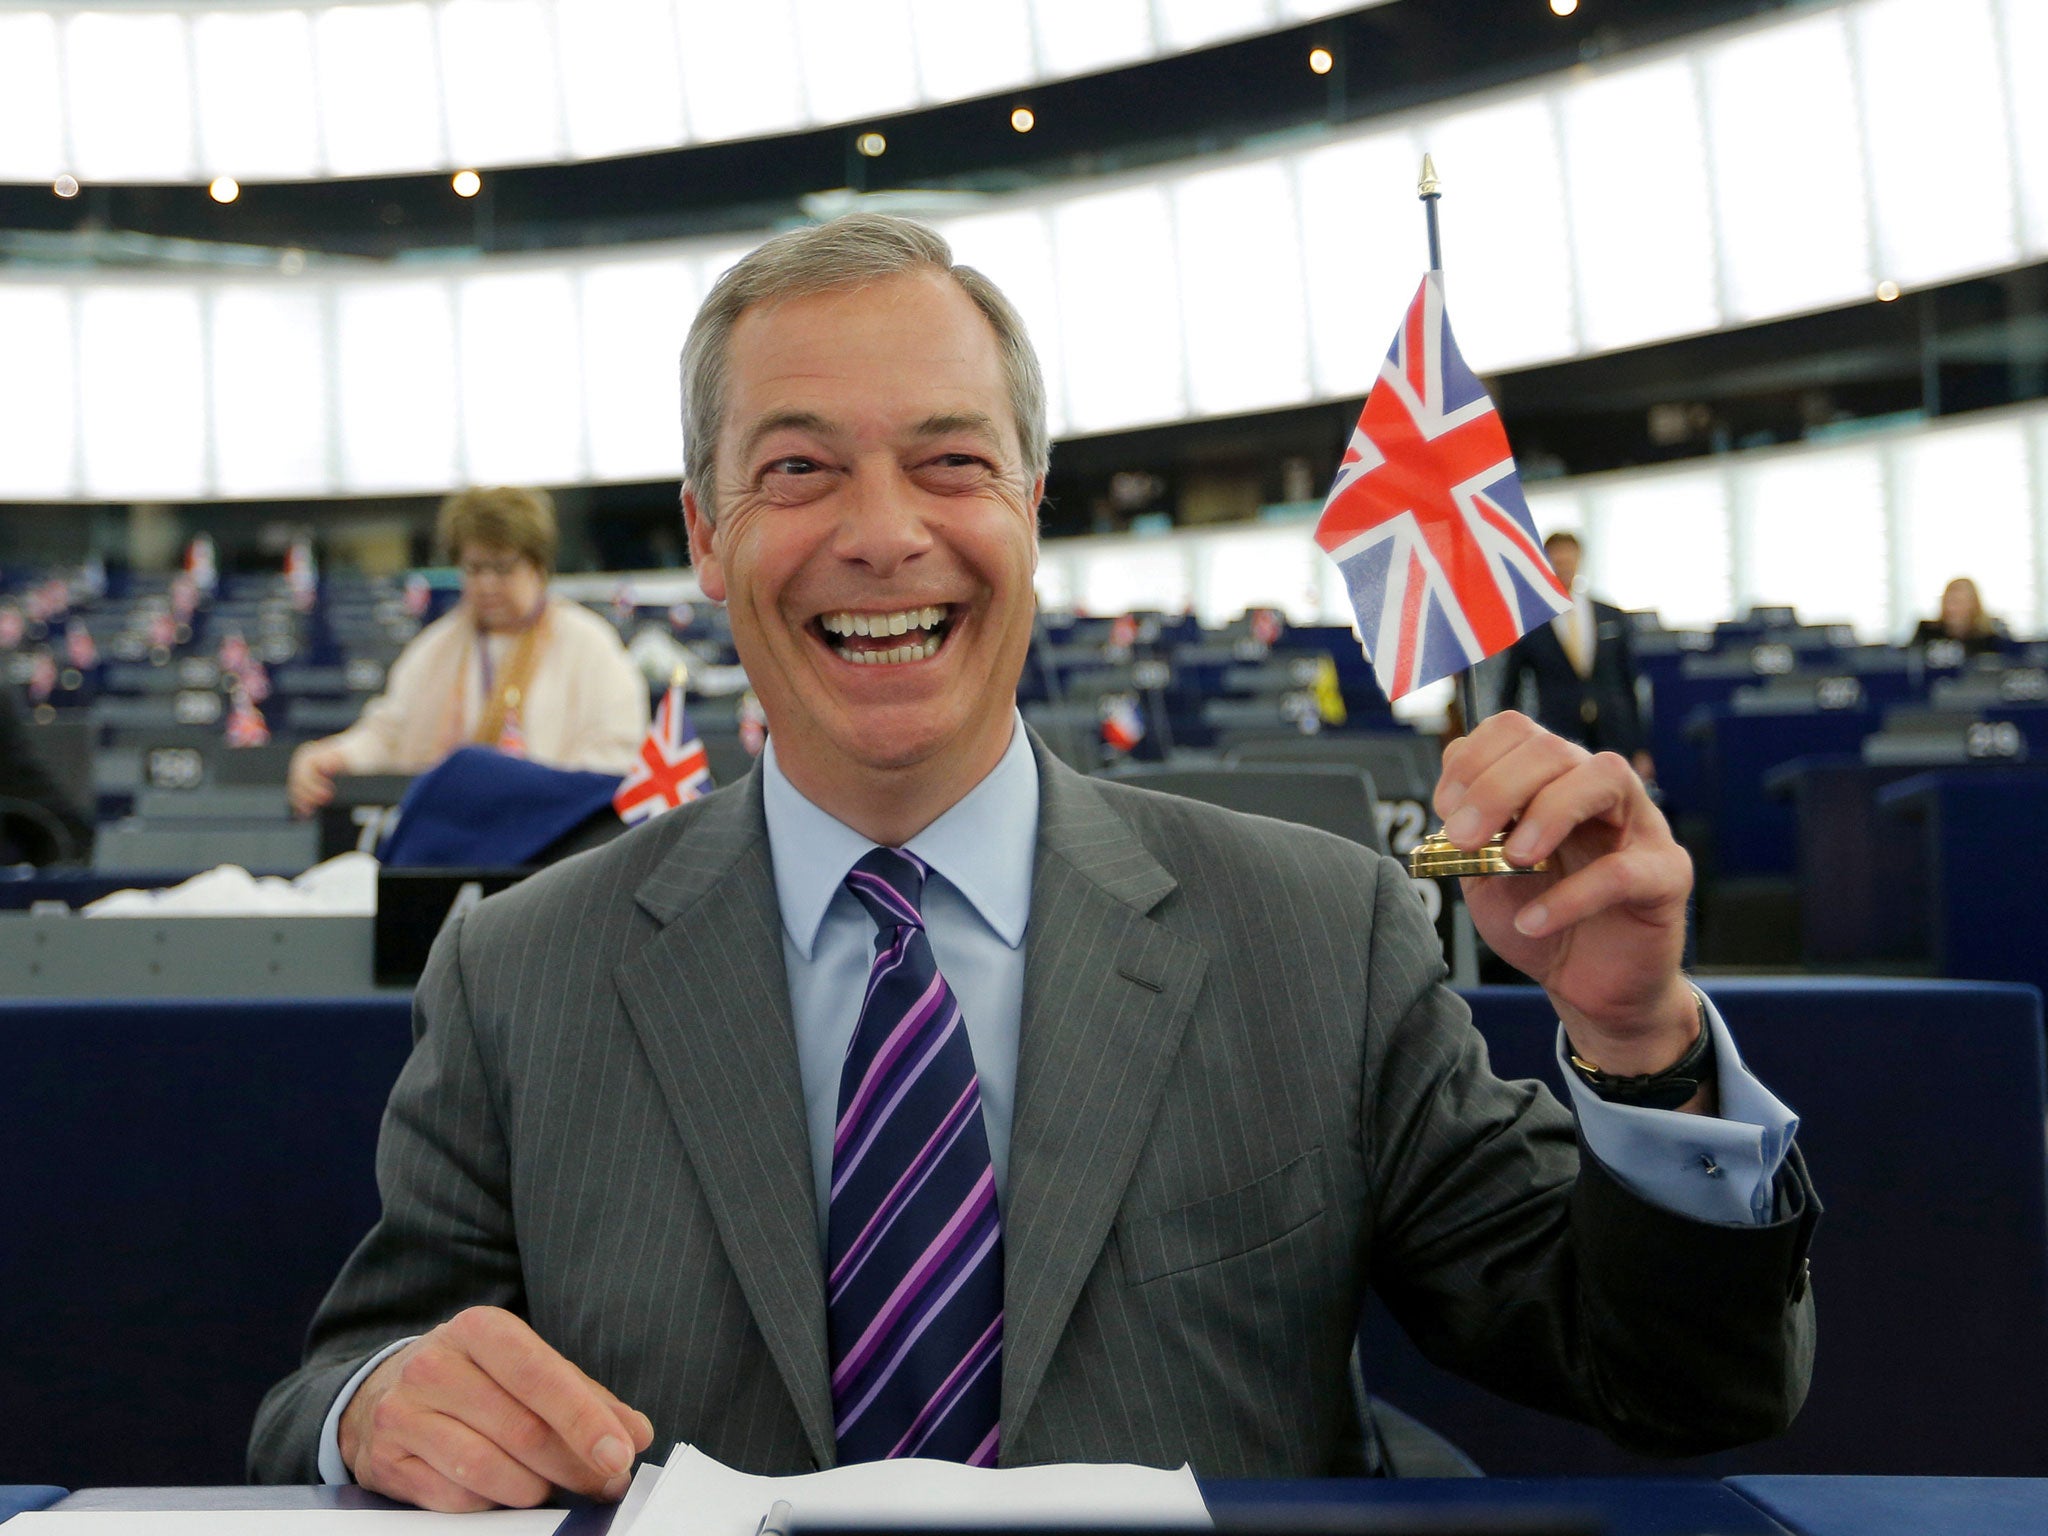 Ukip leader Nigel Farage, who is supporting the Out campaign